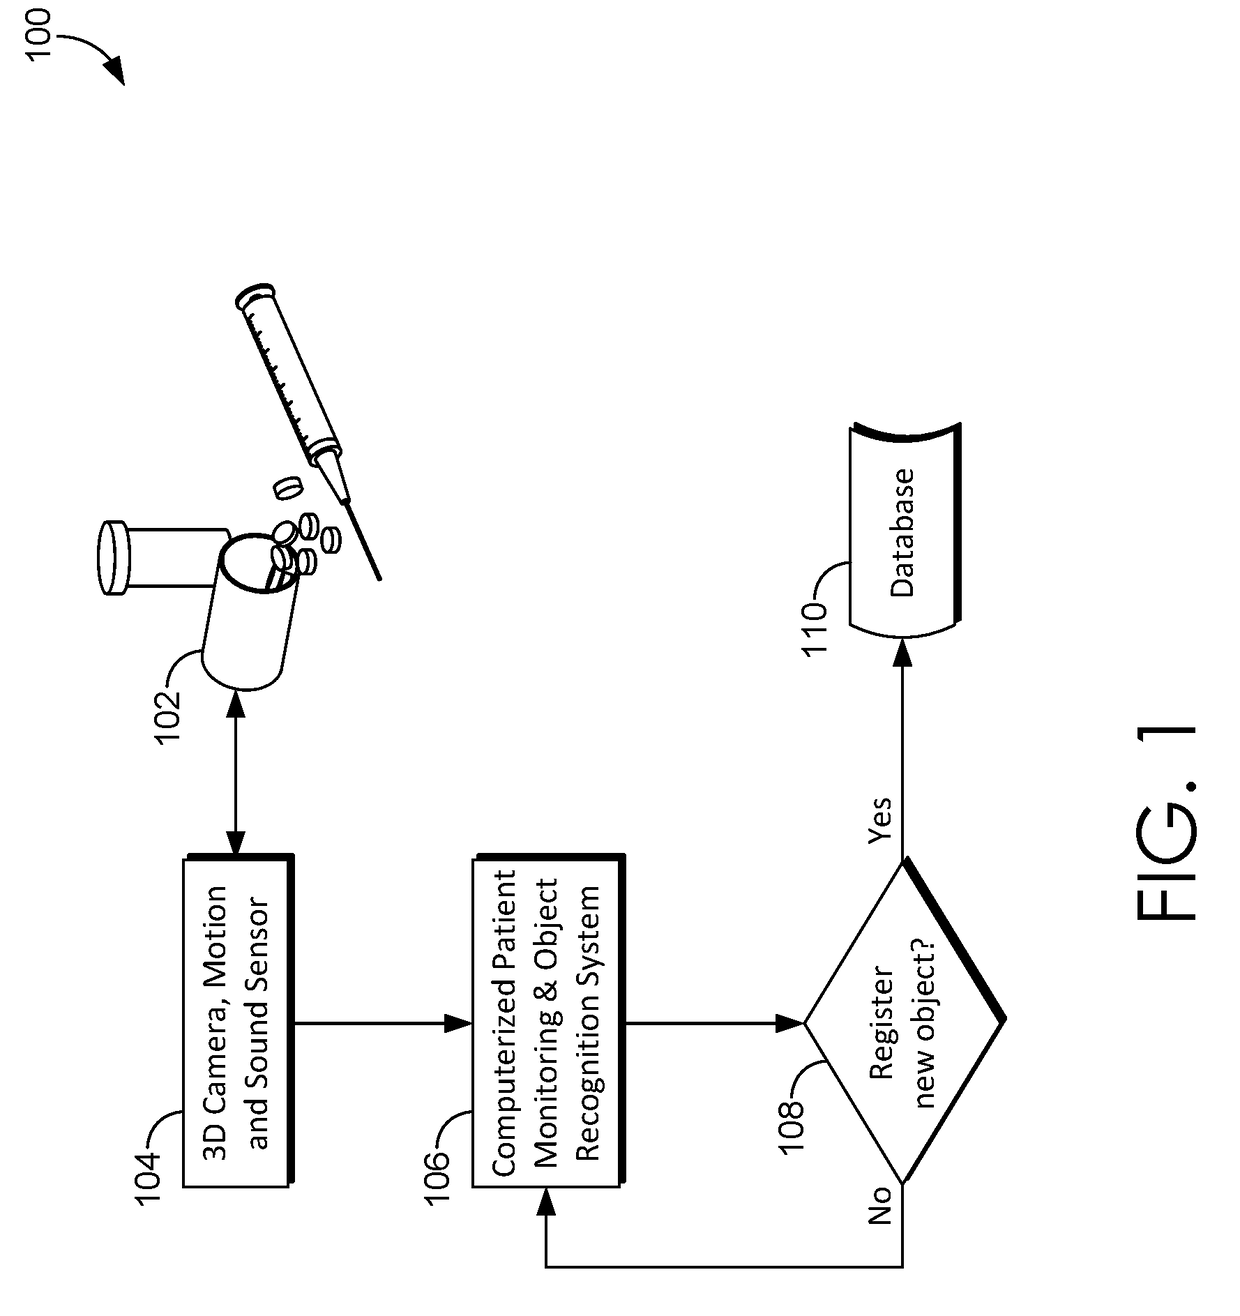 Methods and systems for detecting prohibited objects in a patient room